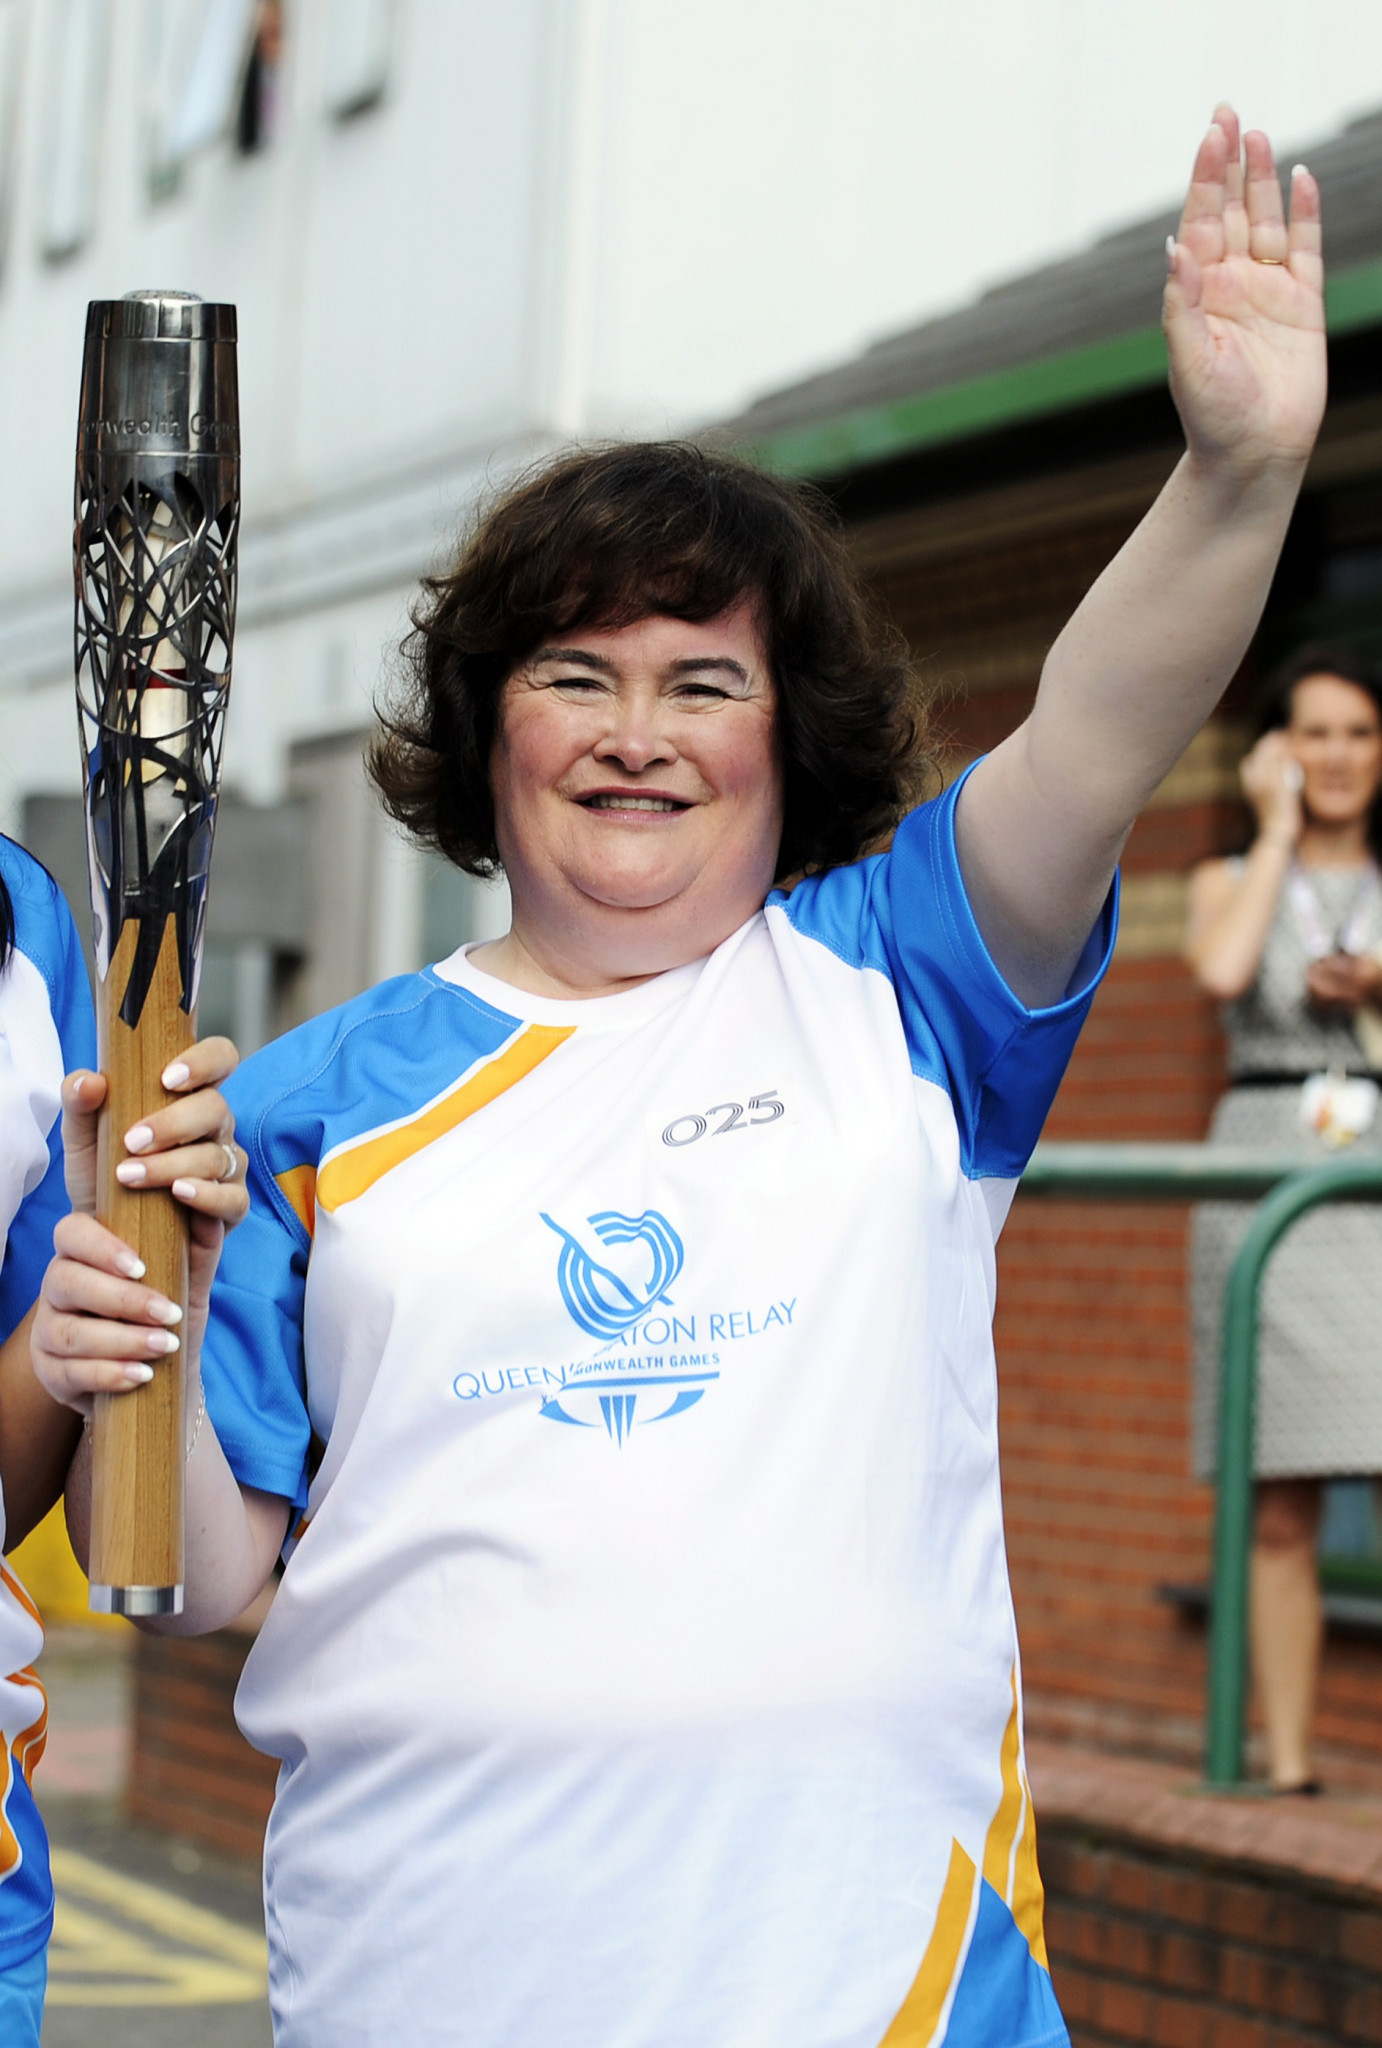 Commonwealth Games England Board member Delia Bushell was alleged to have shared a tasteless joke about Scottish singer Susan Boyle, a prominent figure during Glasgow 2014 ©Getty Images